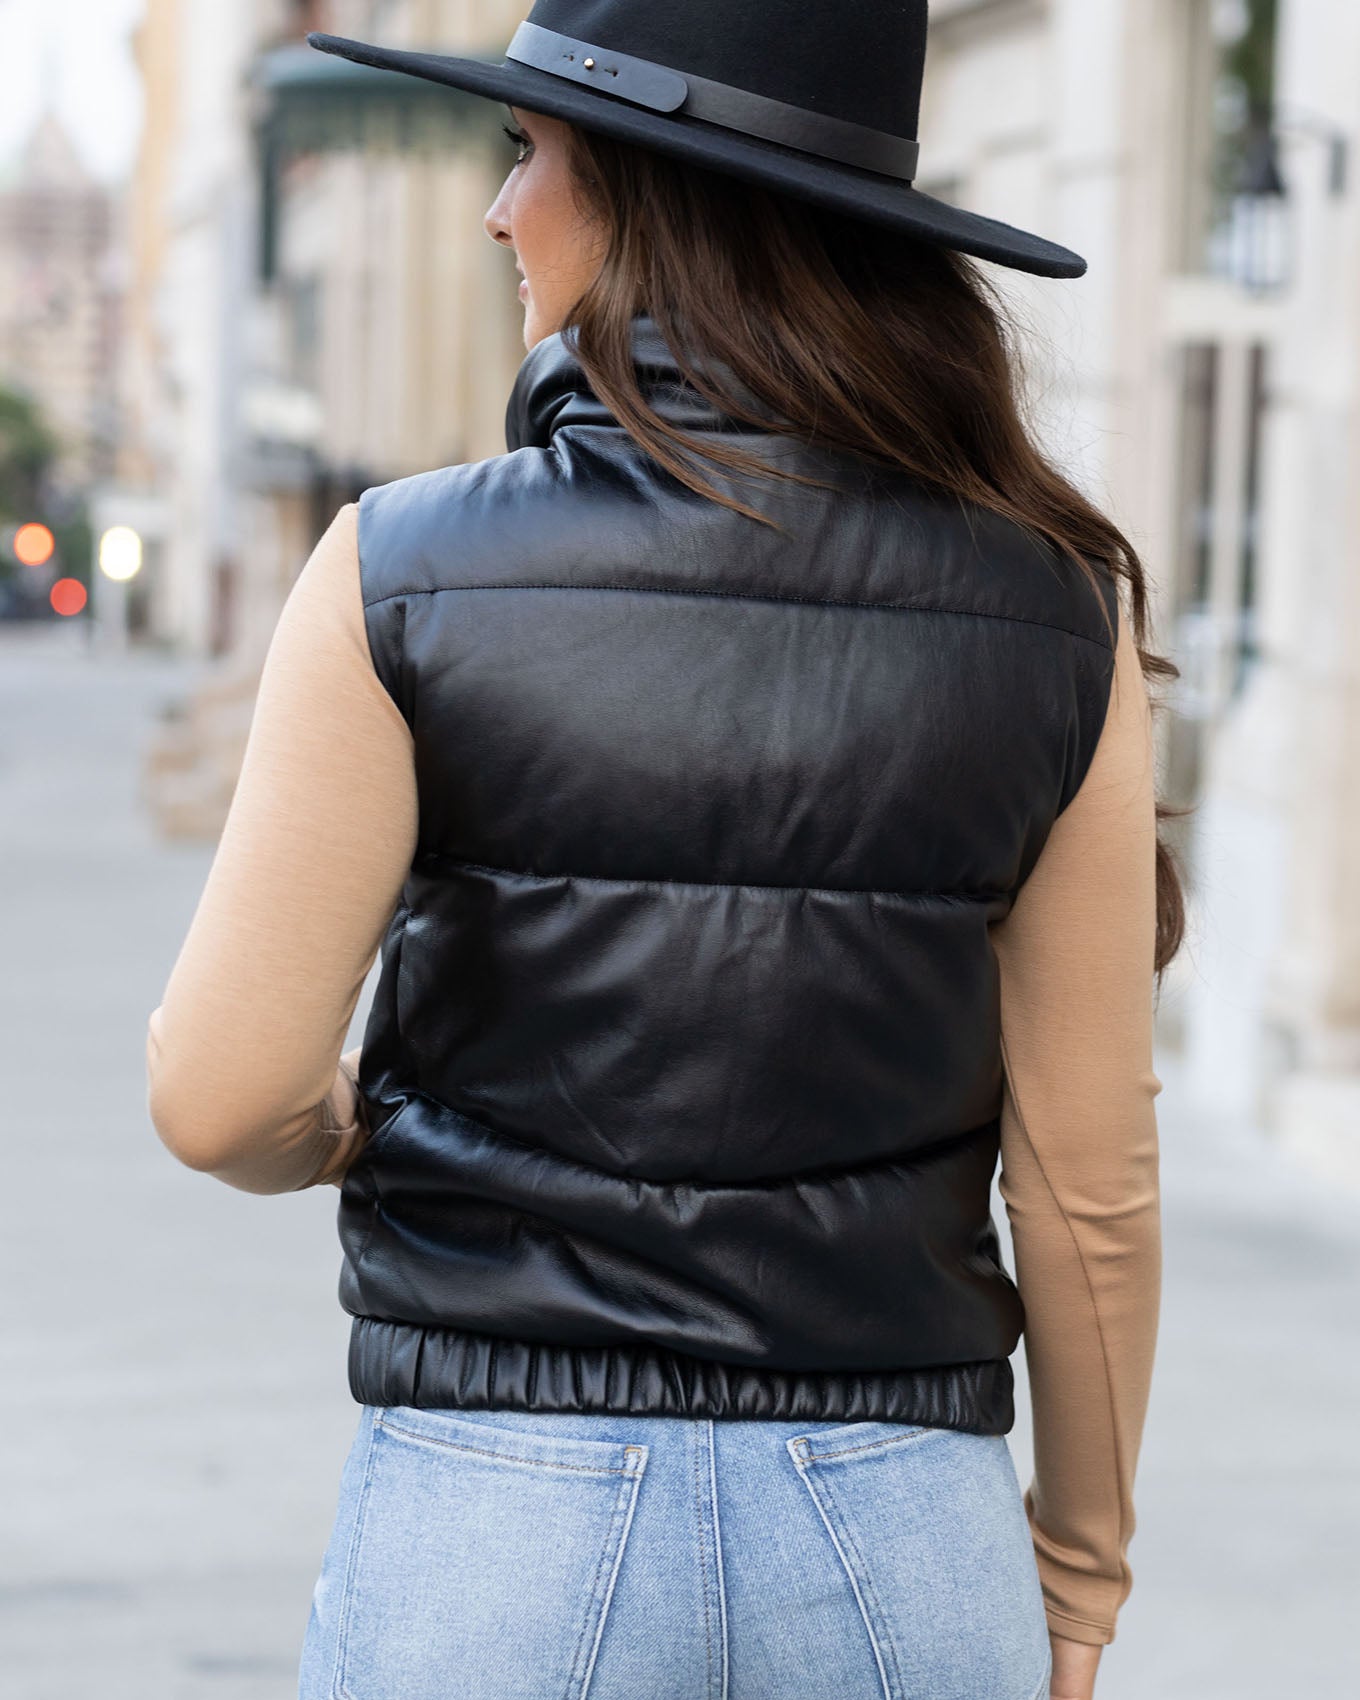 Trendy Black Leather Jacket and Handbag for a Gorgeous Street Style Ap -  Leather Skin Shop